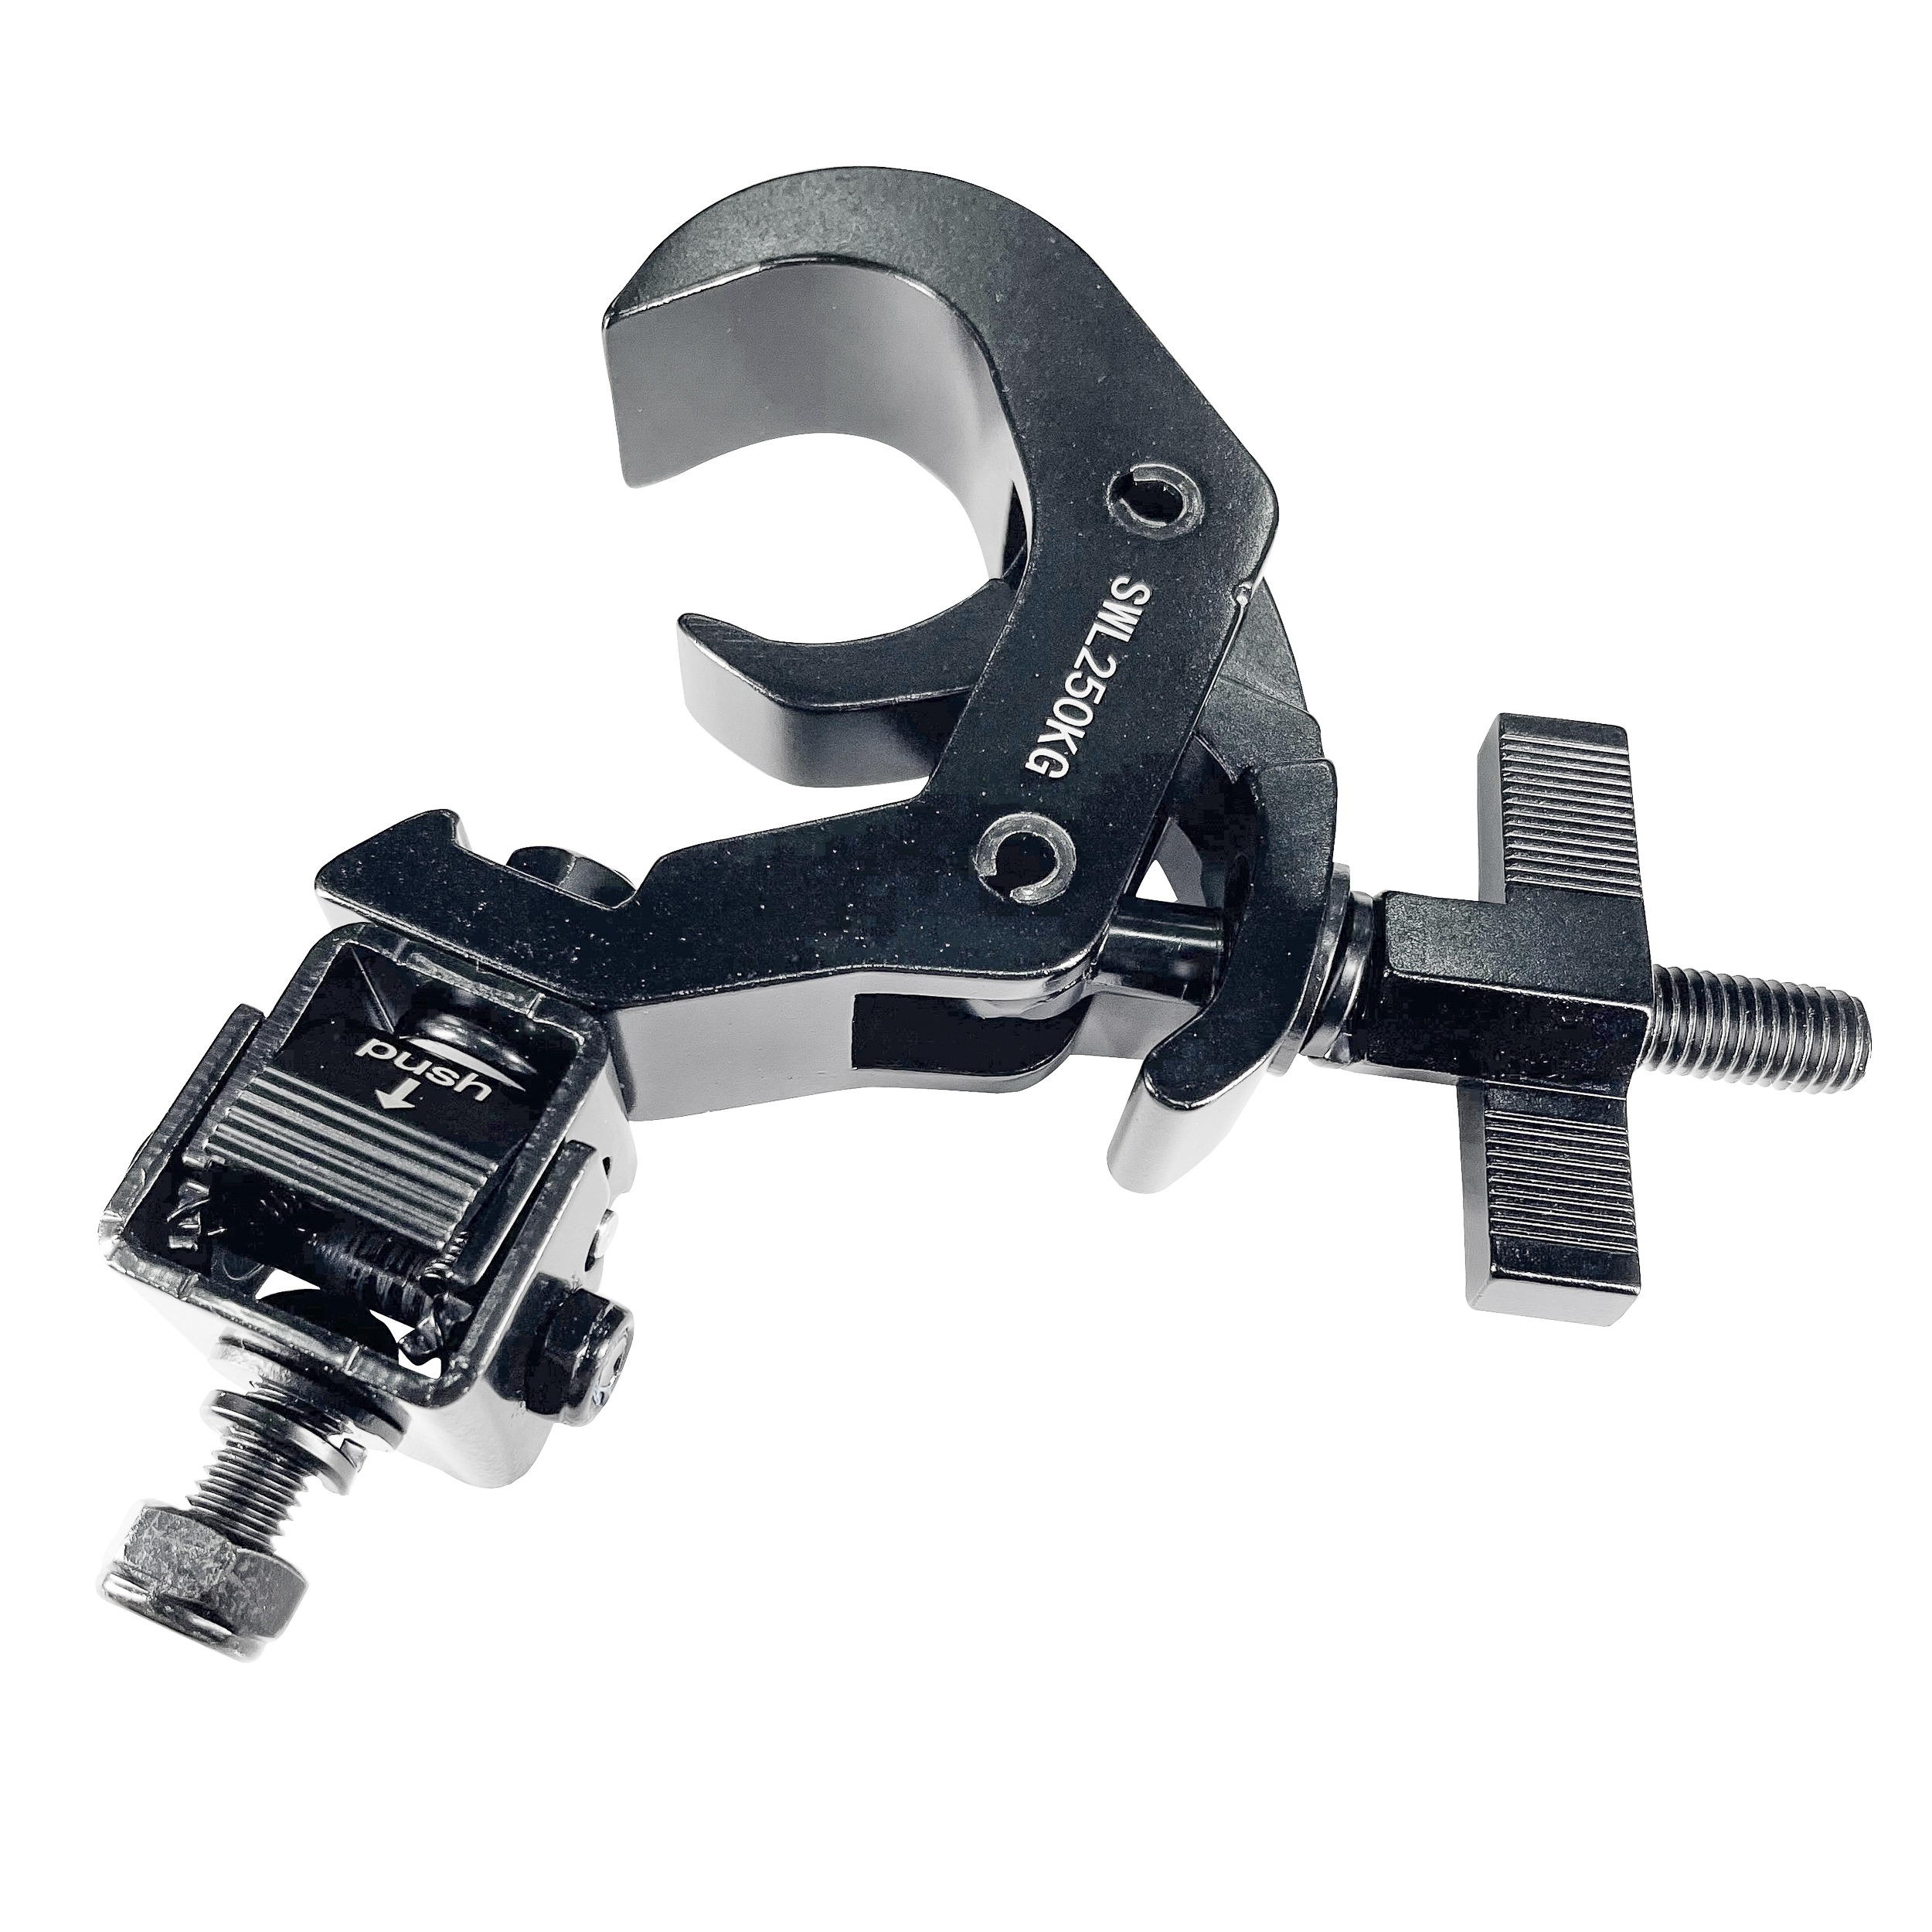 Set of (4) Quick 90º Folding Clamp Adapters with T-C12 Truss Clamp 2 in.  Diameter Black Finish - Max Load: 330 lbs